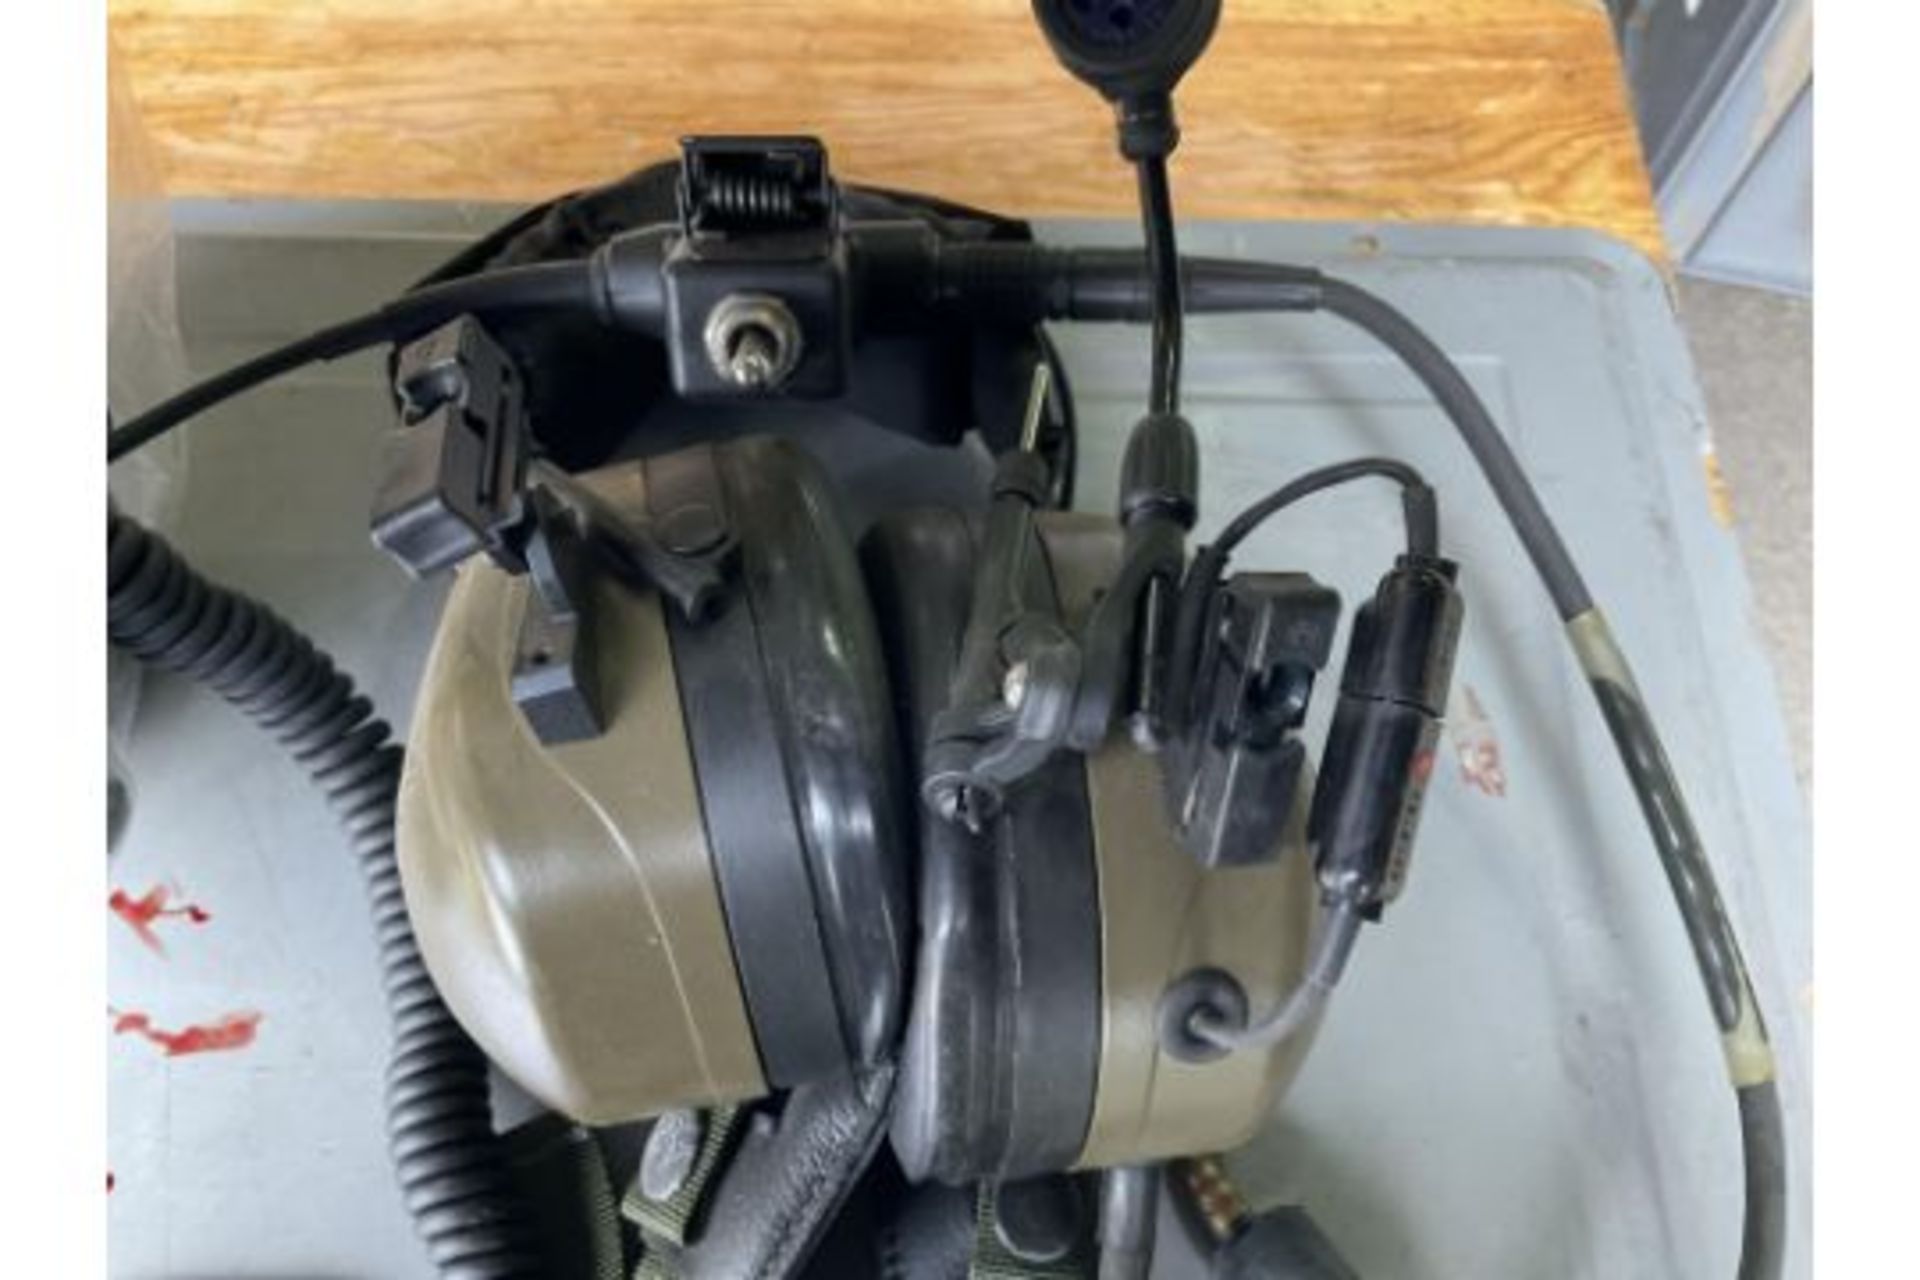 2X UNISSUED MEL AVIATION PELTOR HIGH ATTENVATION HELICOPTER ETC PILOTS HEADSETS. - Image 3 of 3